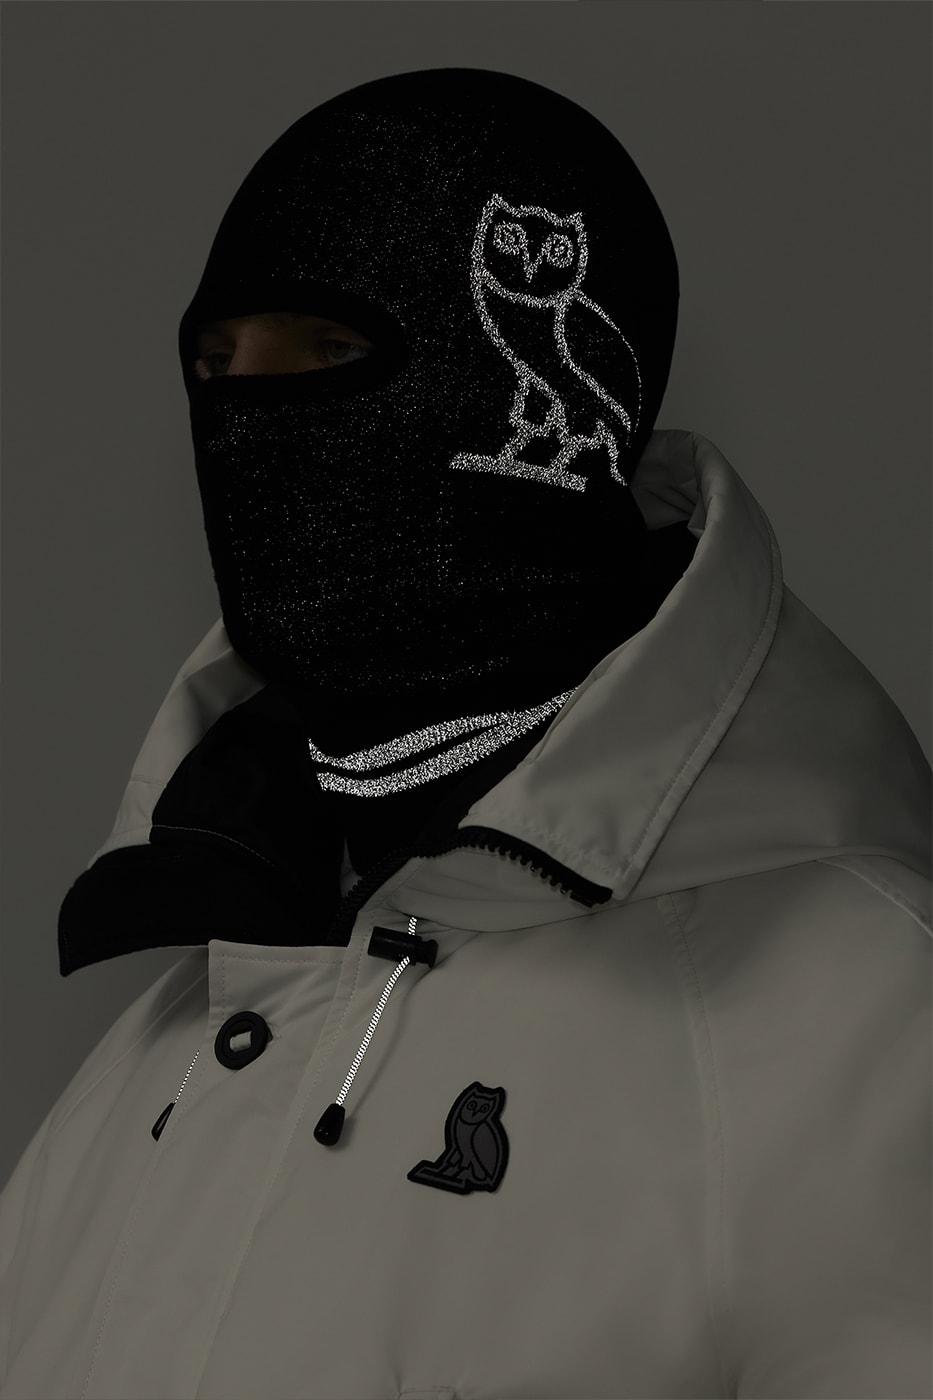 Canada Goose x OVO Celebrate 12 Years of Partnership With "Life at Night" Capsule release info drake toronto canadian brand octobers very own balaclava scarf chillwakc bomber 